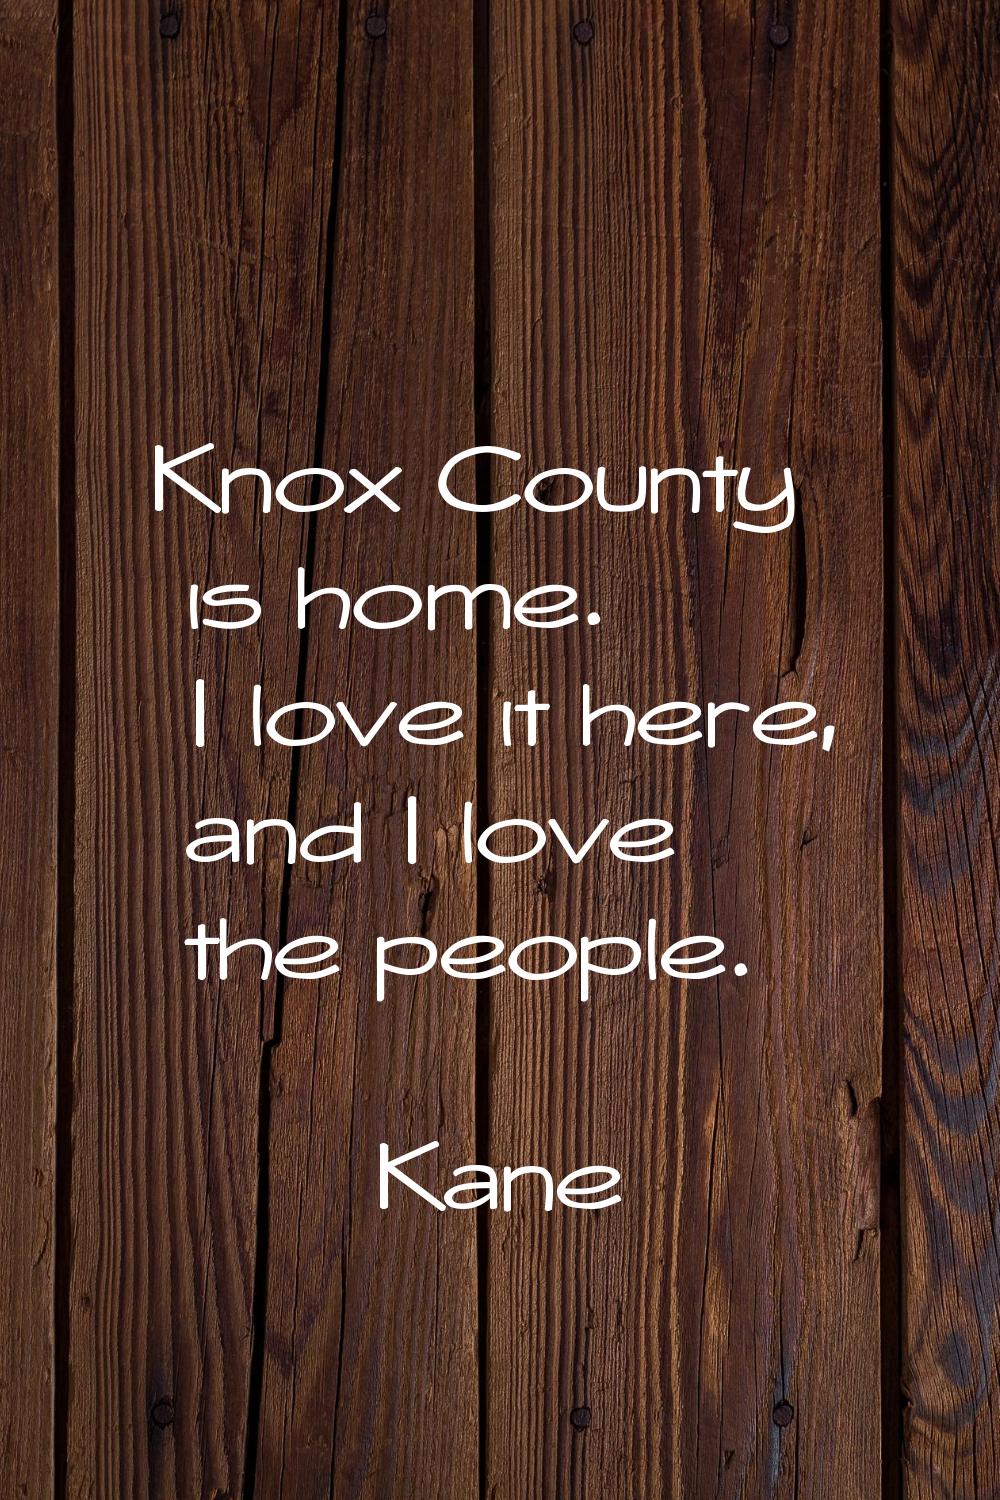 Knox County is home. I love it here, and I love the people.